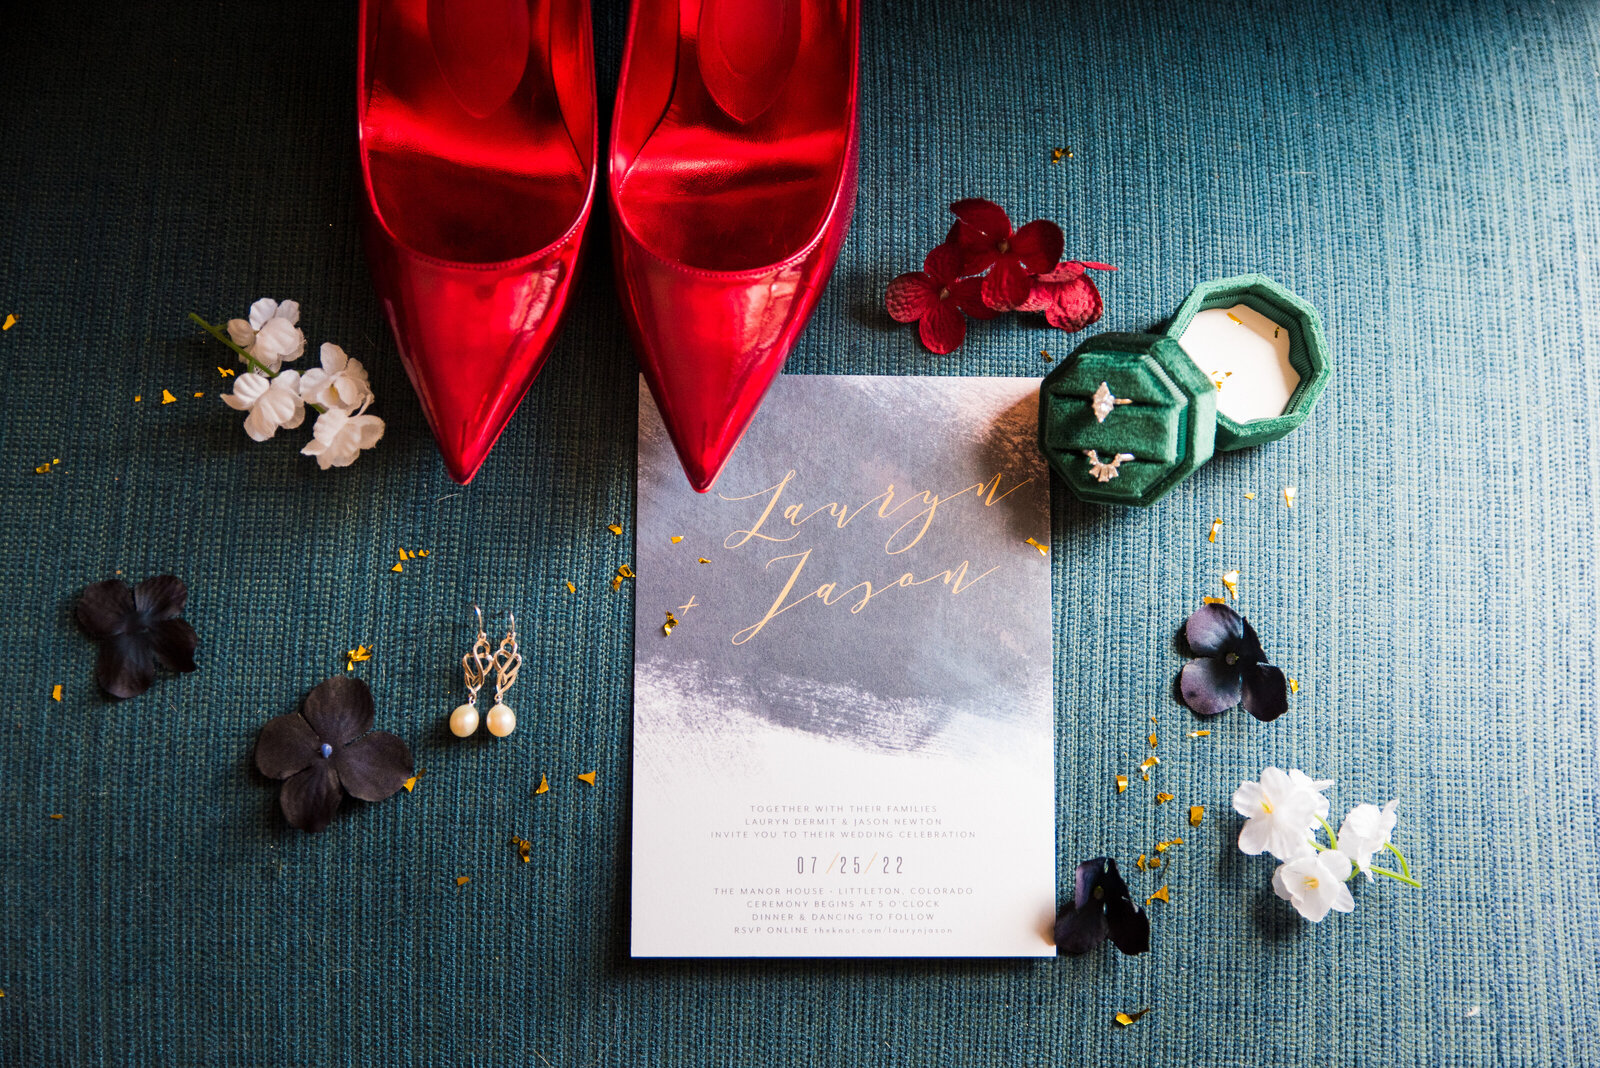 The wedding details including an invitation, jewelry, and bright red heels.